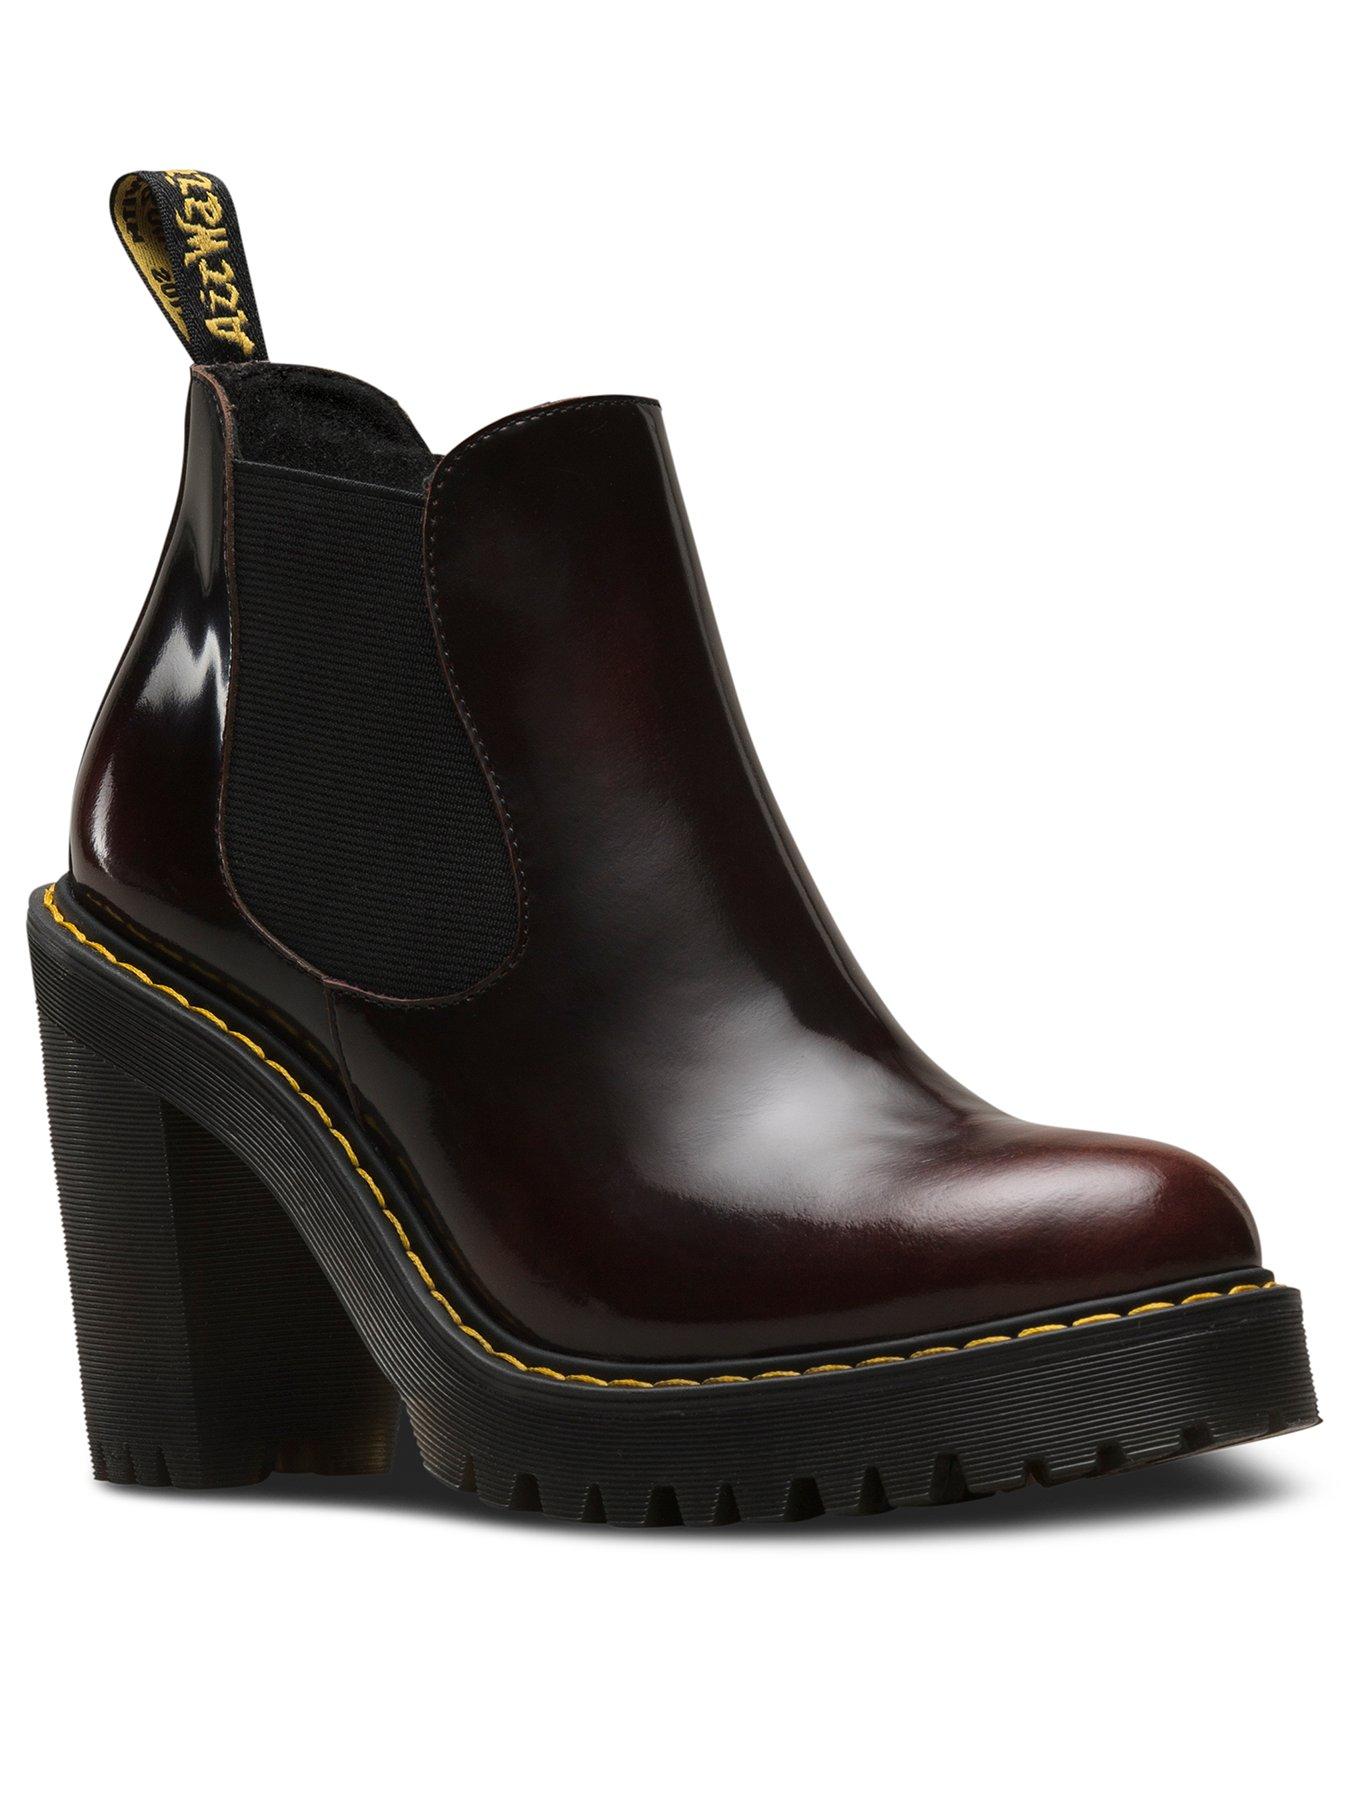 Dr Martens Hurston Ankle Boots Cherry Red Very Co Uk